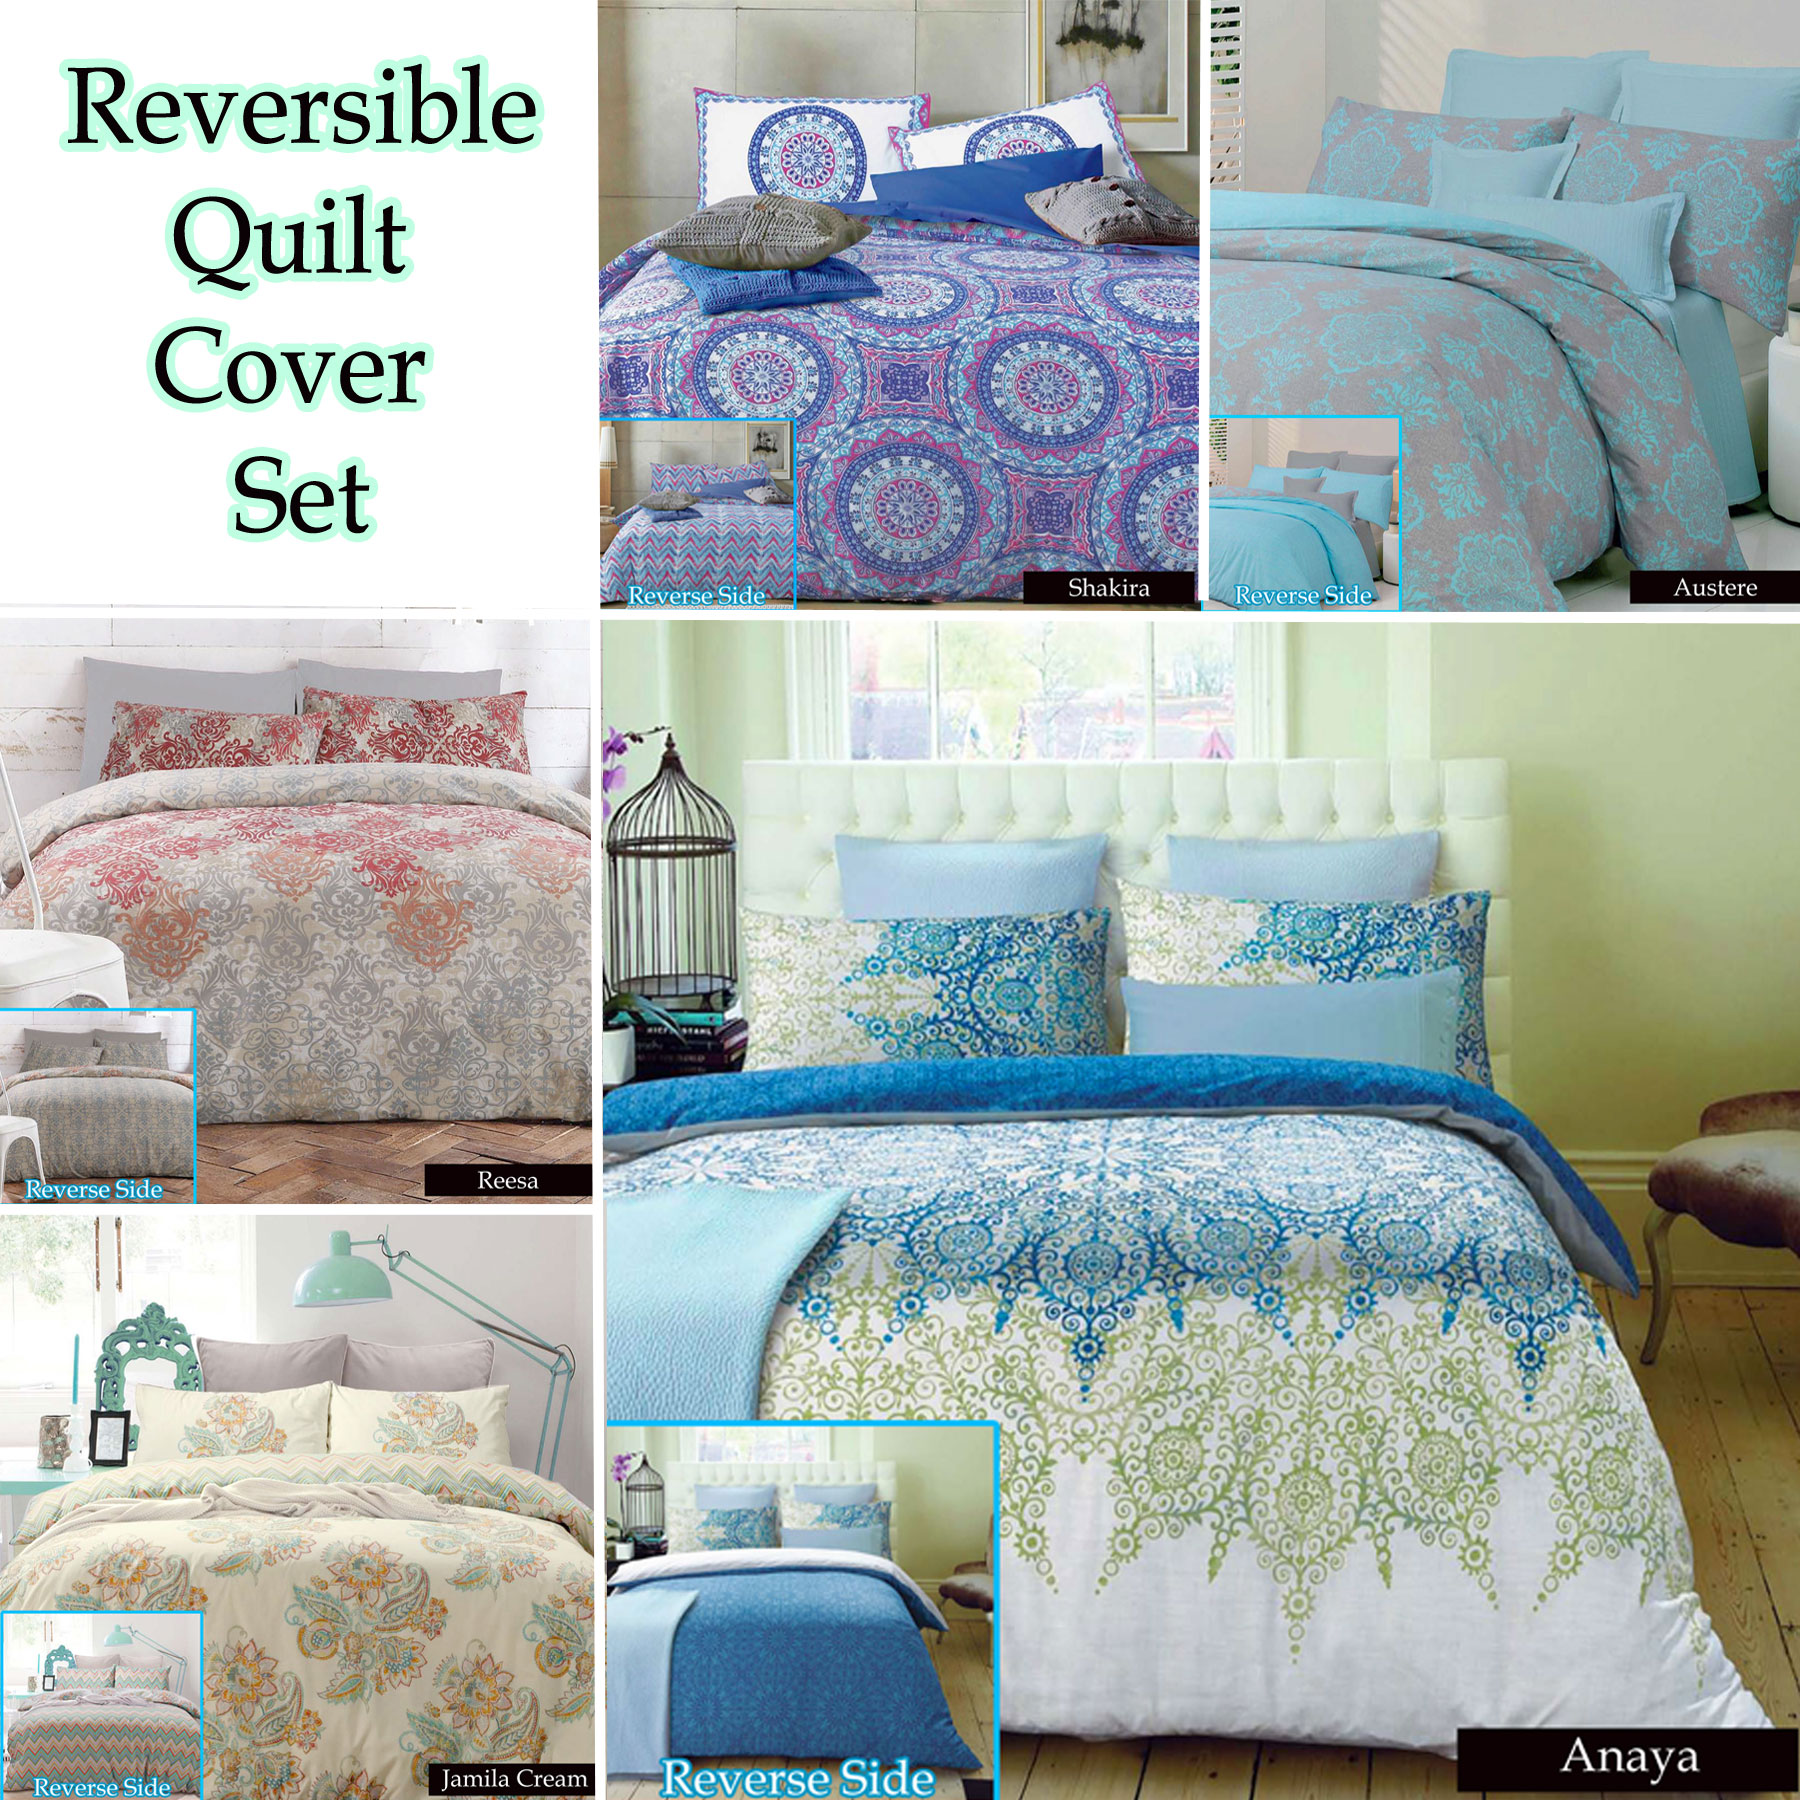 Reversible Quilt Cover Set by Apartmento SINGLE DOUBLE QUEEN KING | eBay